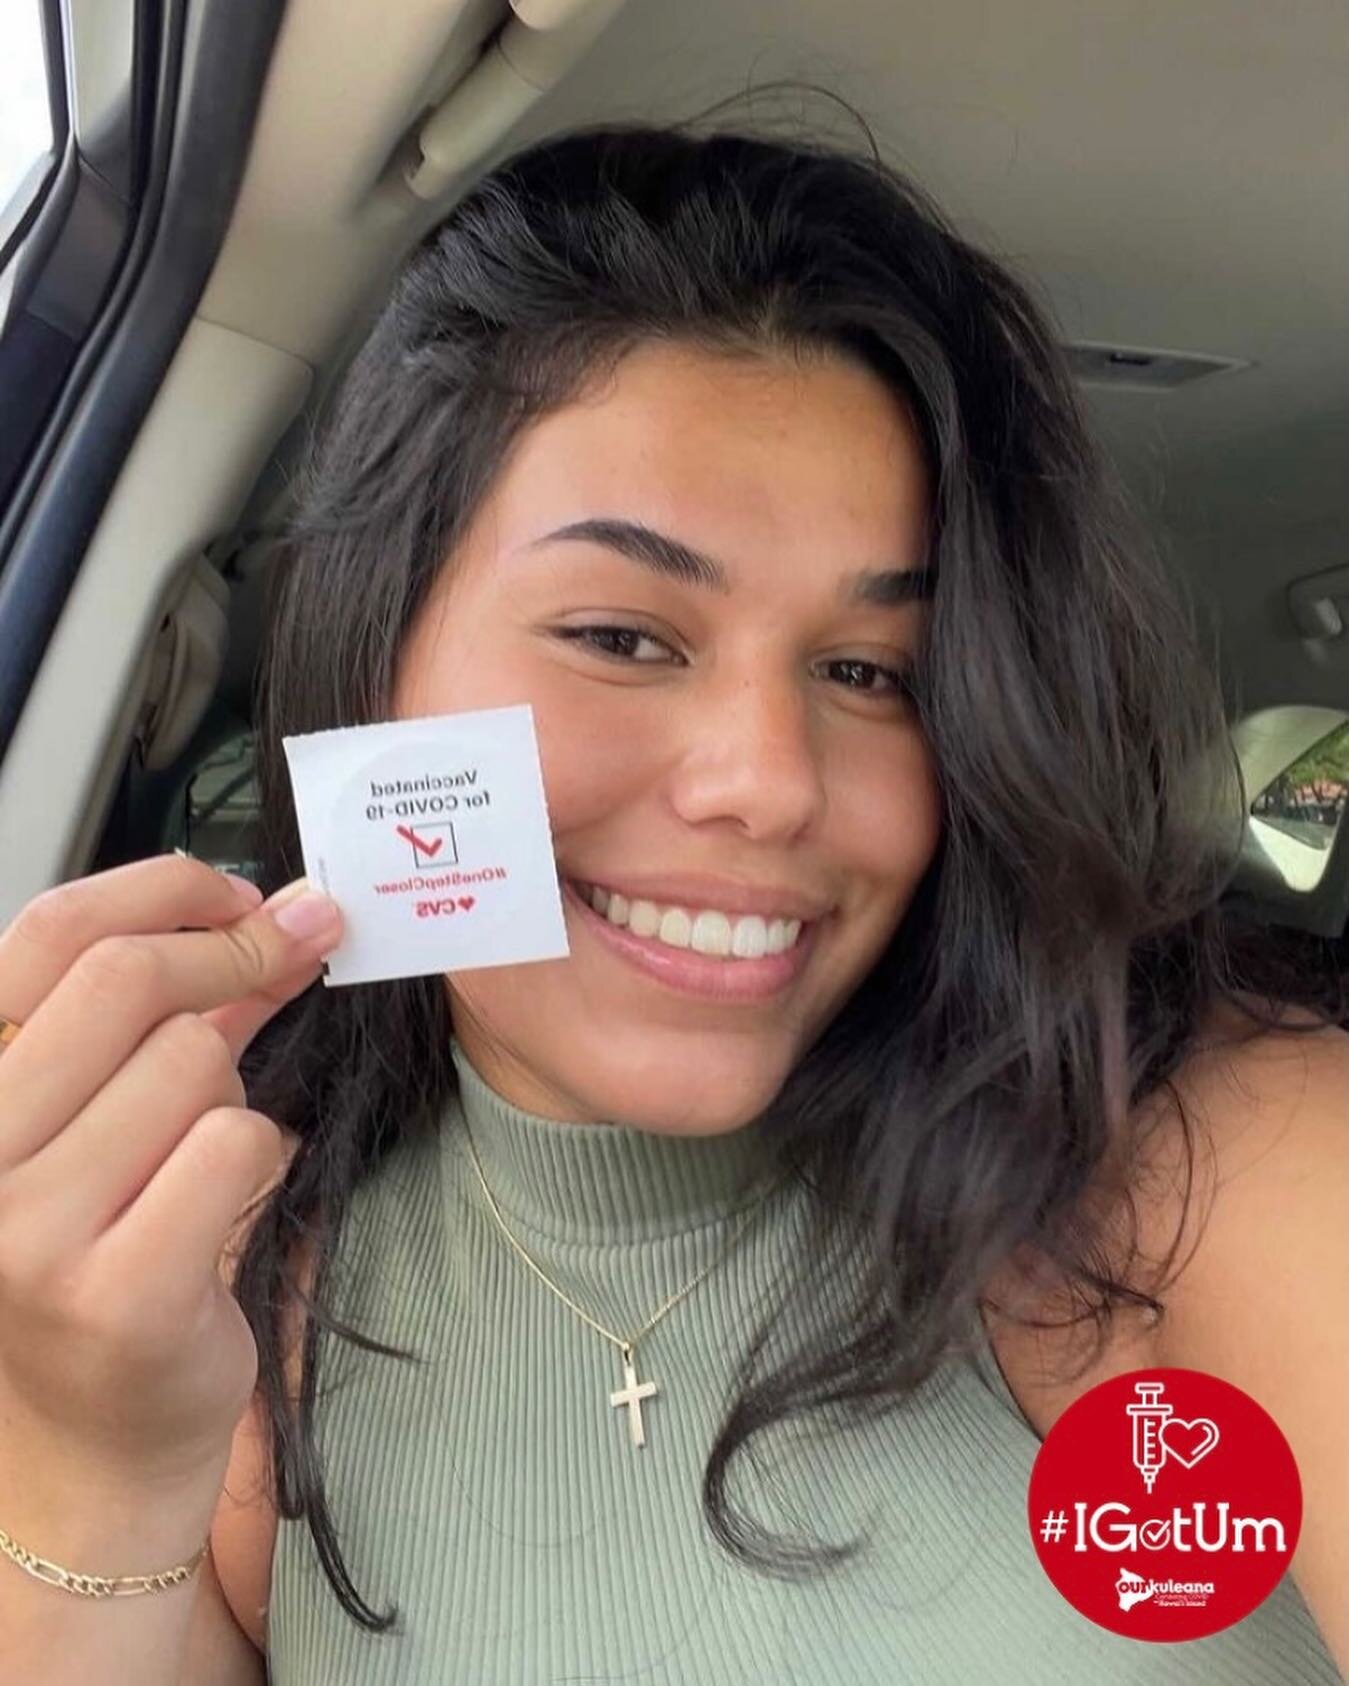 &ldquo;I got the COVID-19 vaccine to help protect myself and those around me!&rdquo;

Ava Jules
YouTuber